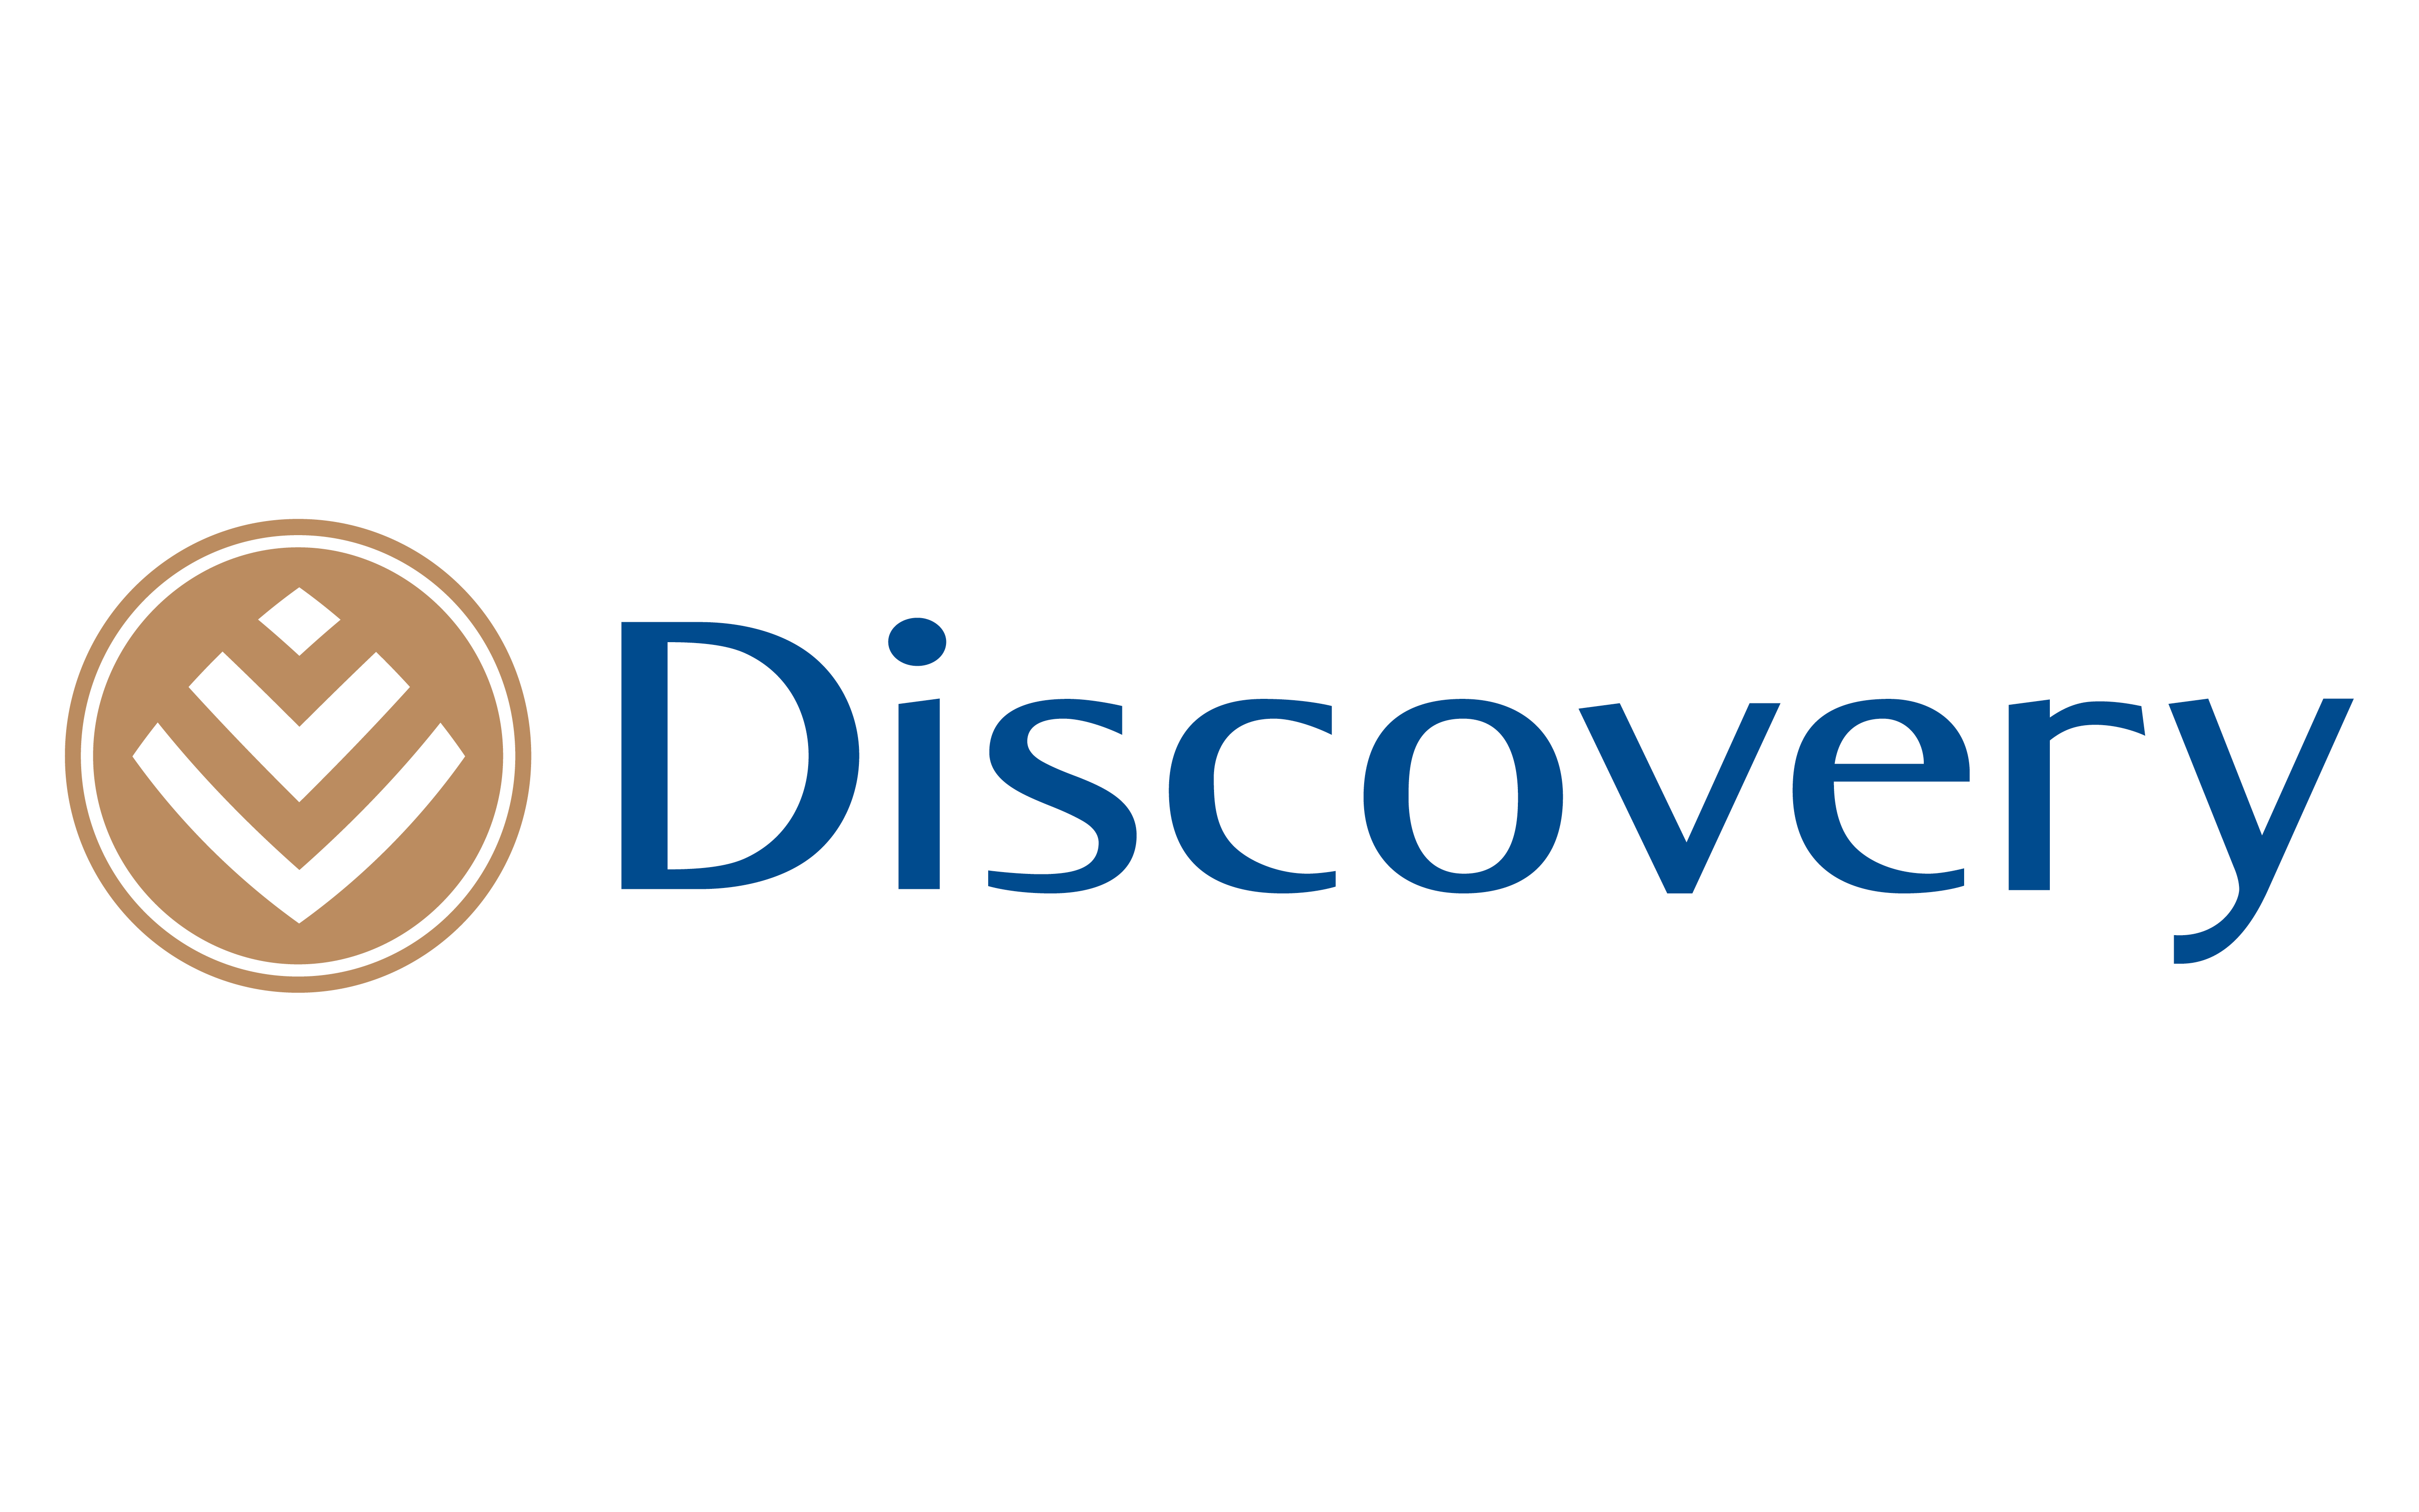 Discover groups. Discover invest логотип. Знак Дискавери. Discovery компания. Дискавери банк.